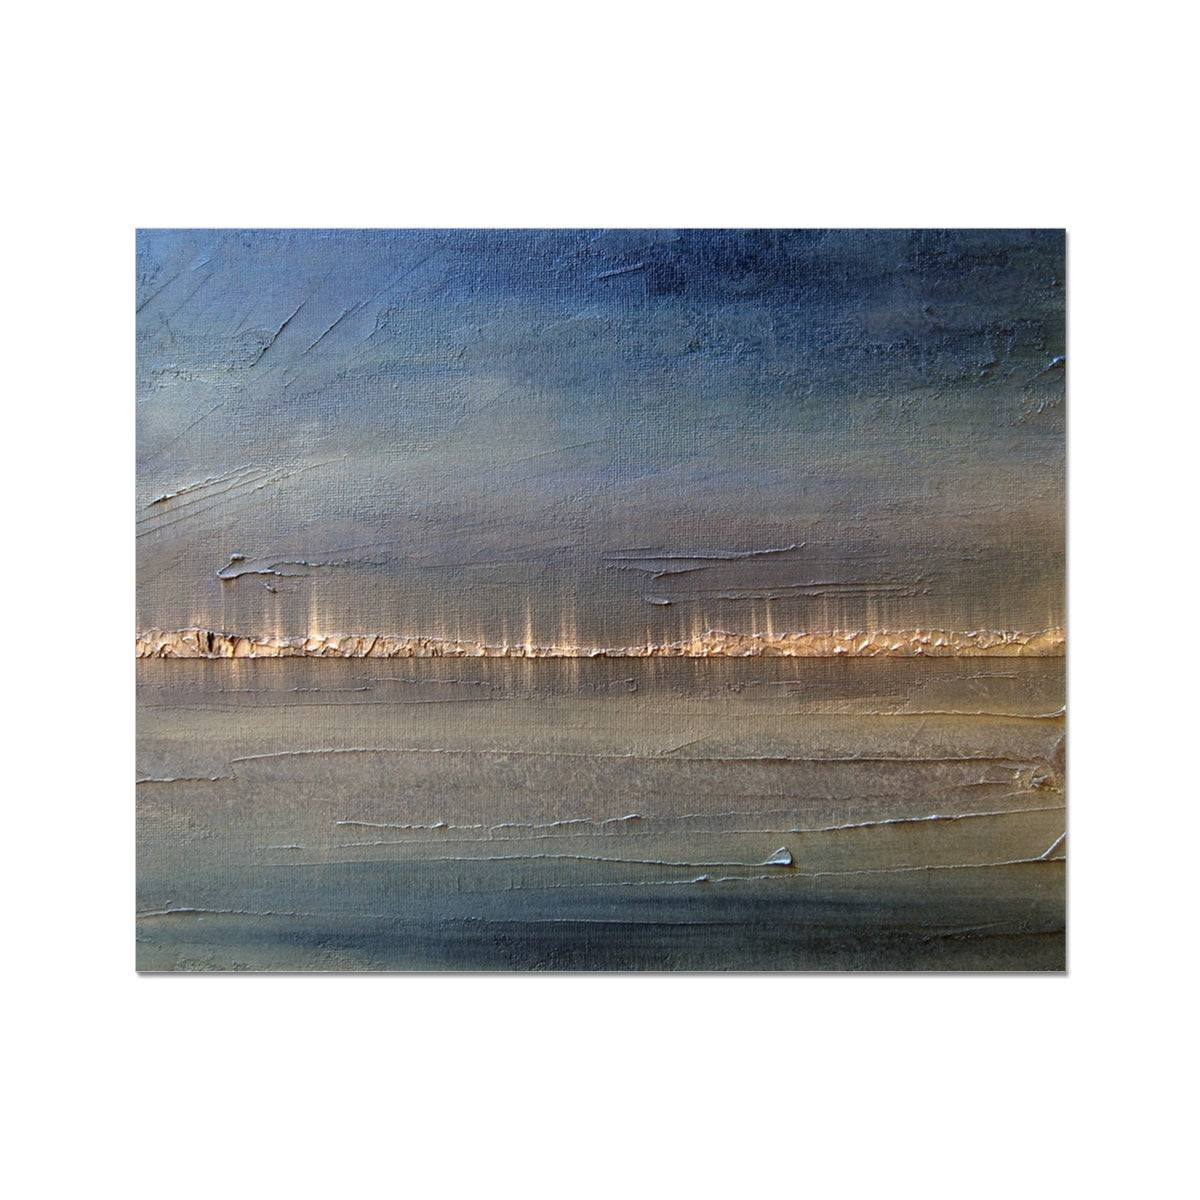 Distant Lights Lake Ontario Painting | Artist Proof Collector Prints From Scotland-Artist Proof Collector Prints-World Art Gallery-20"x16"-Paintings, Prints, Homeware, Art Gifts From Scotland By Scottish Artist Kevin Hunter